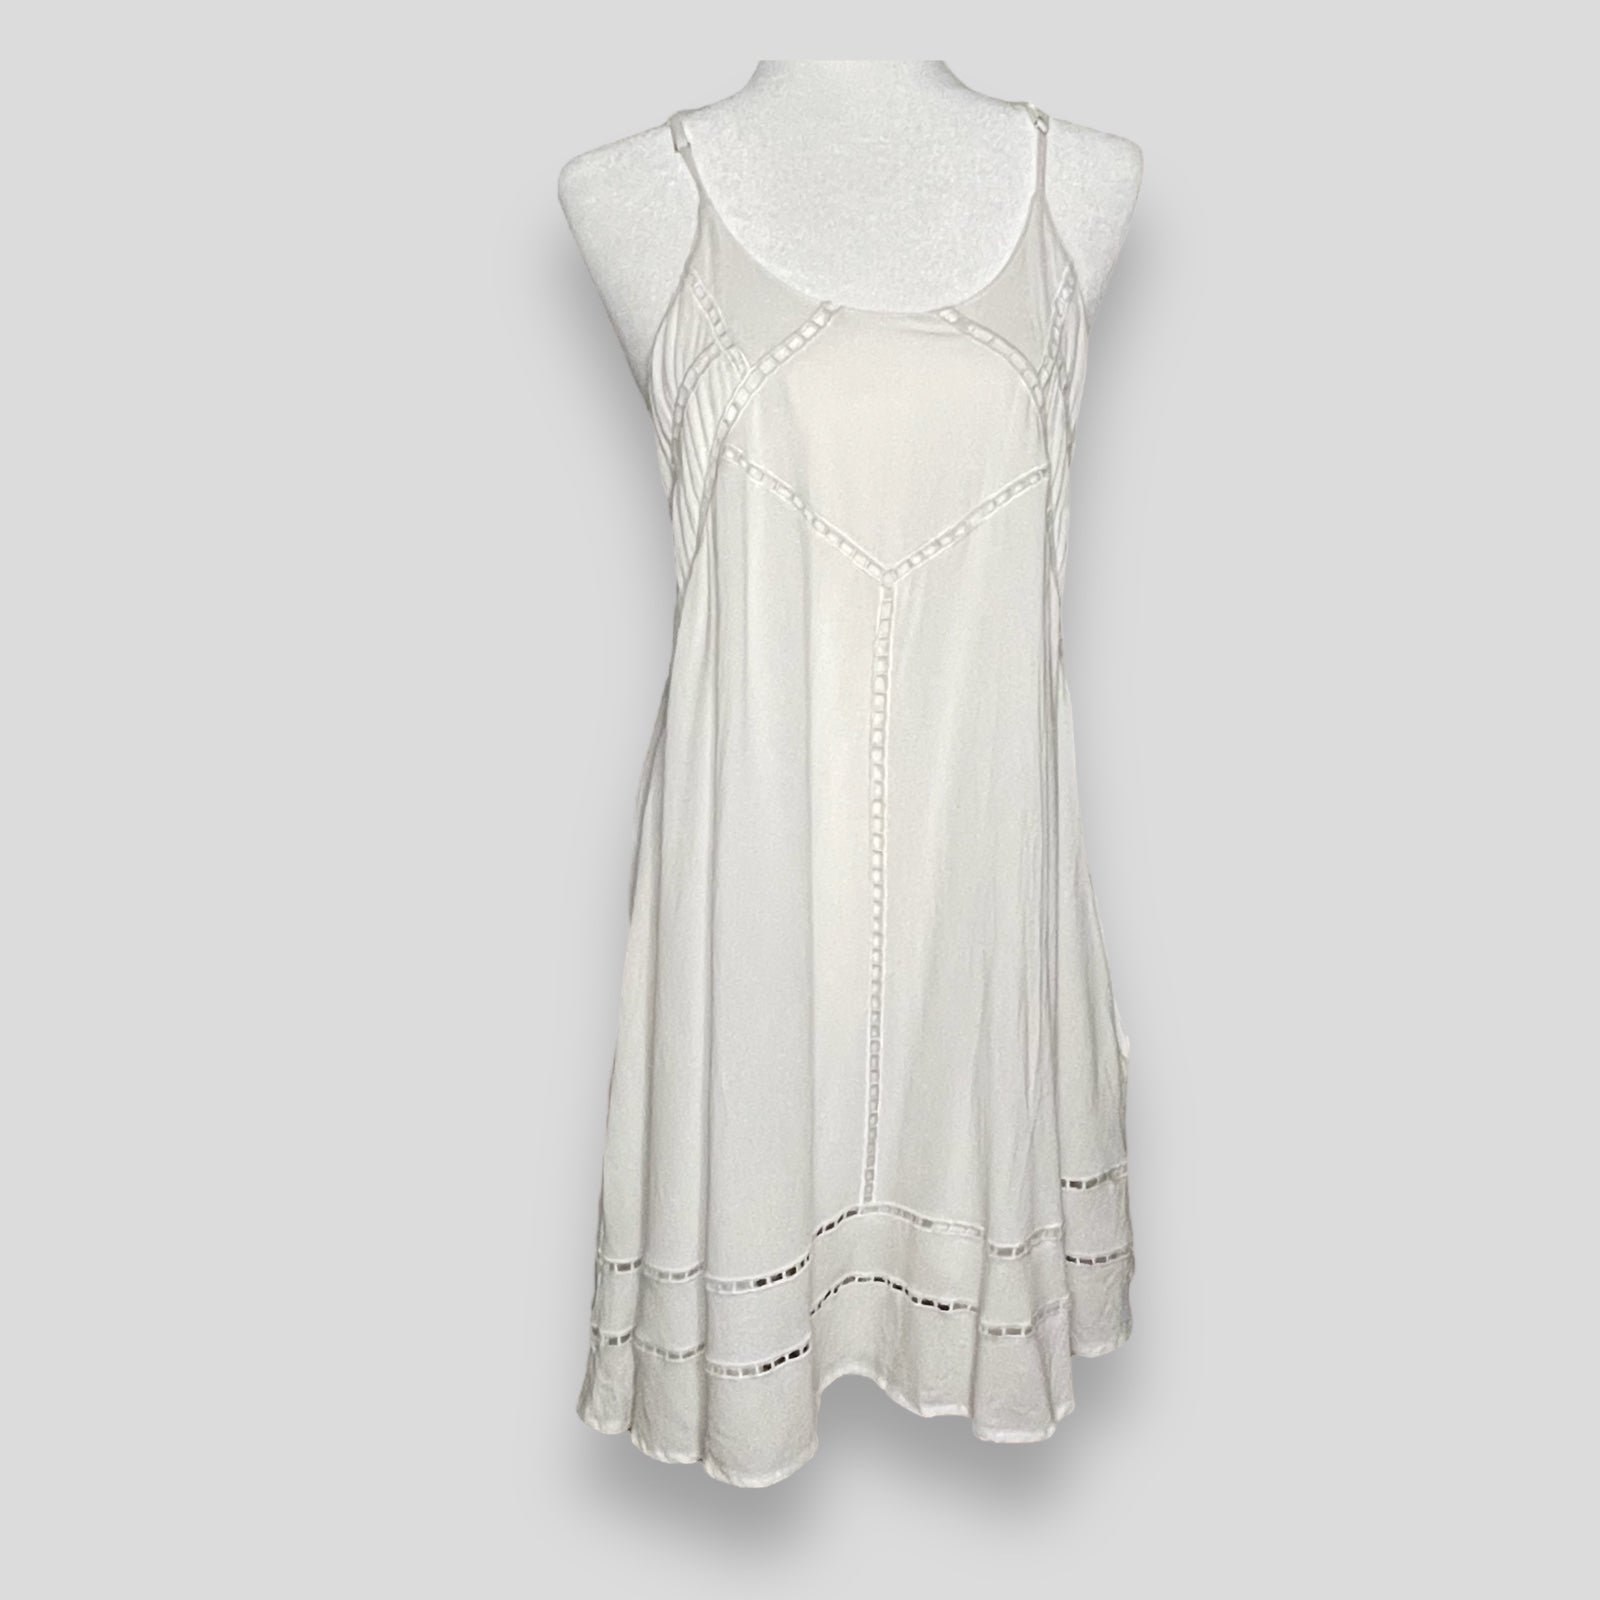 Lulus White Halter Dress with Eyelet Details and Side P